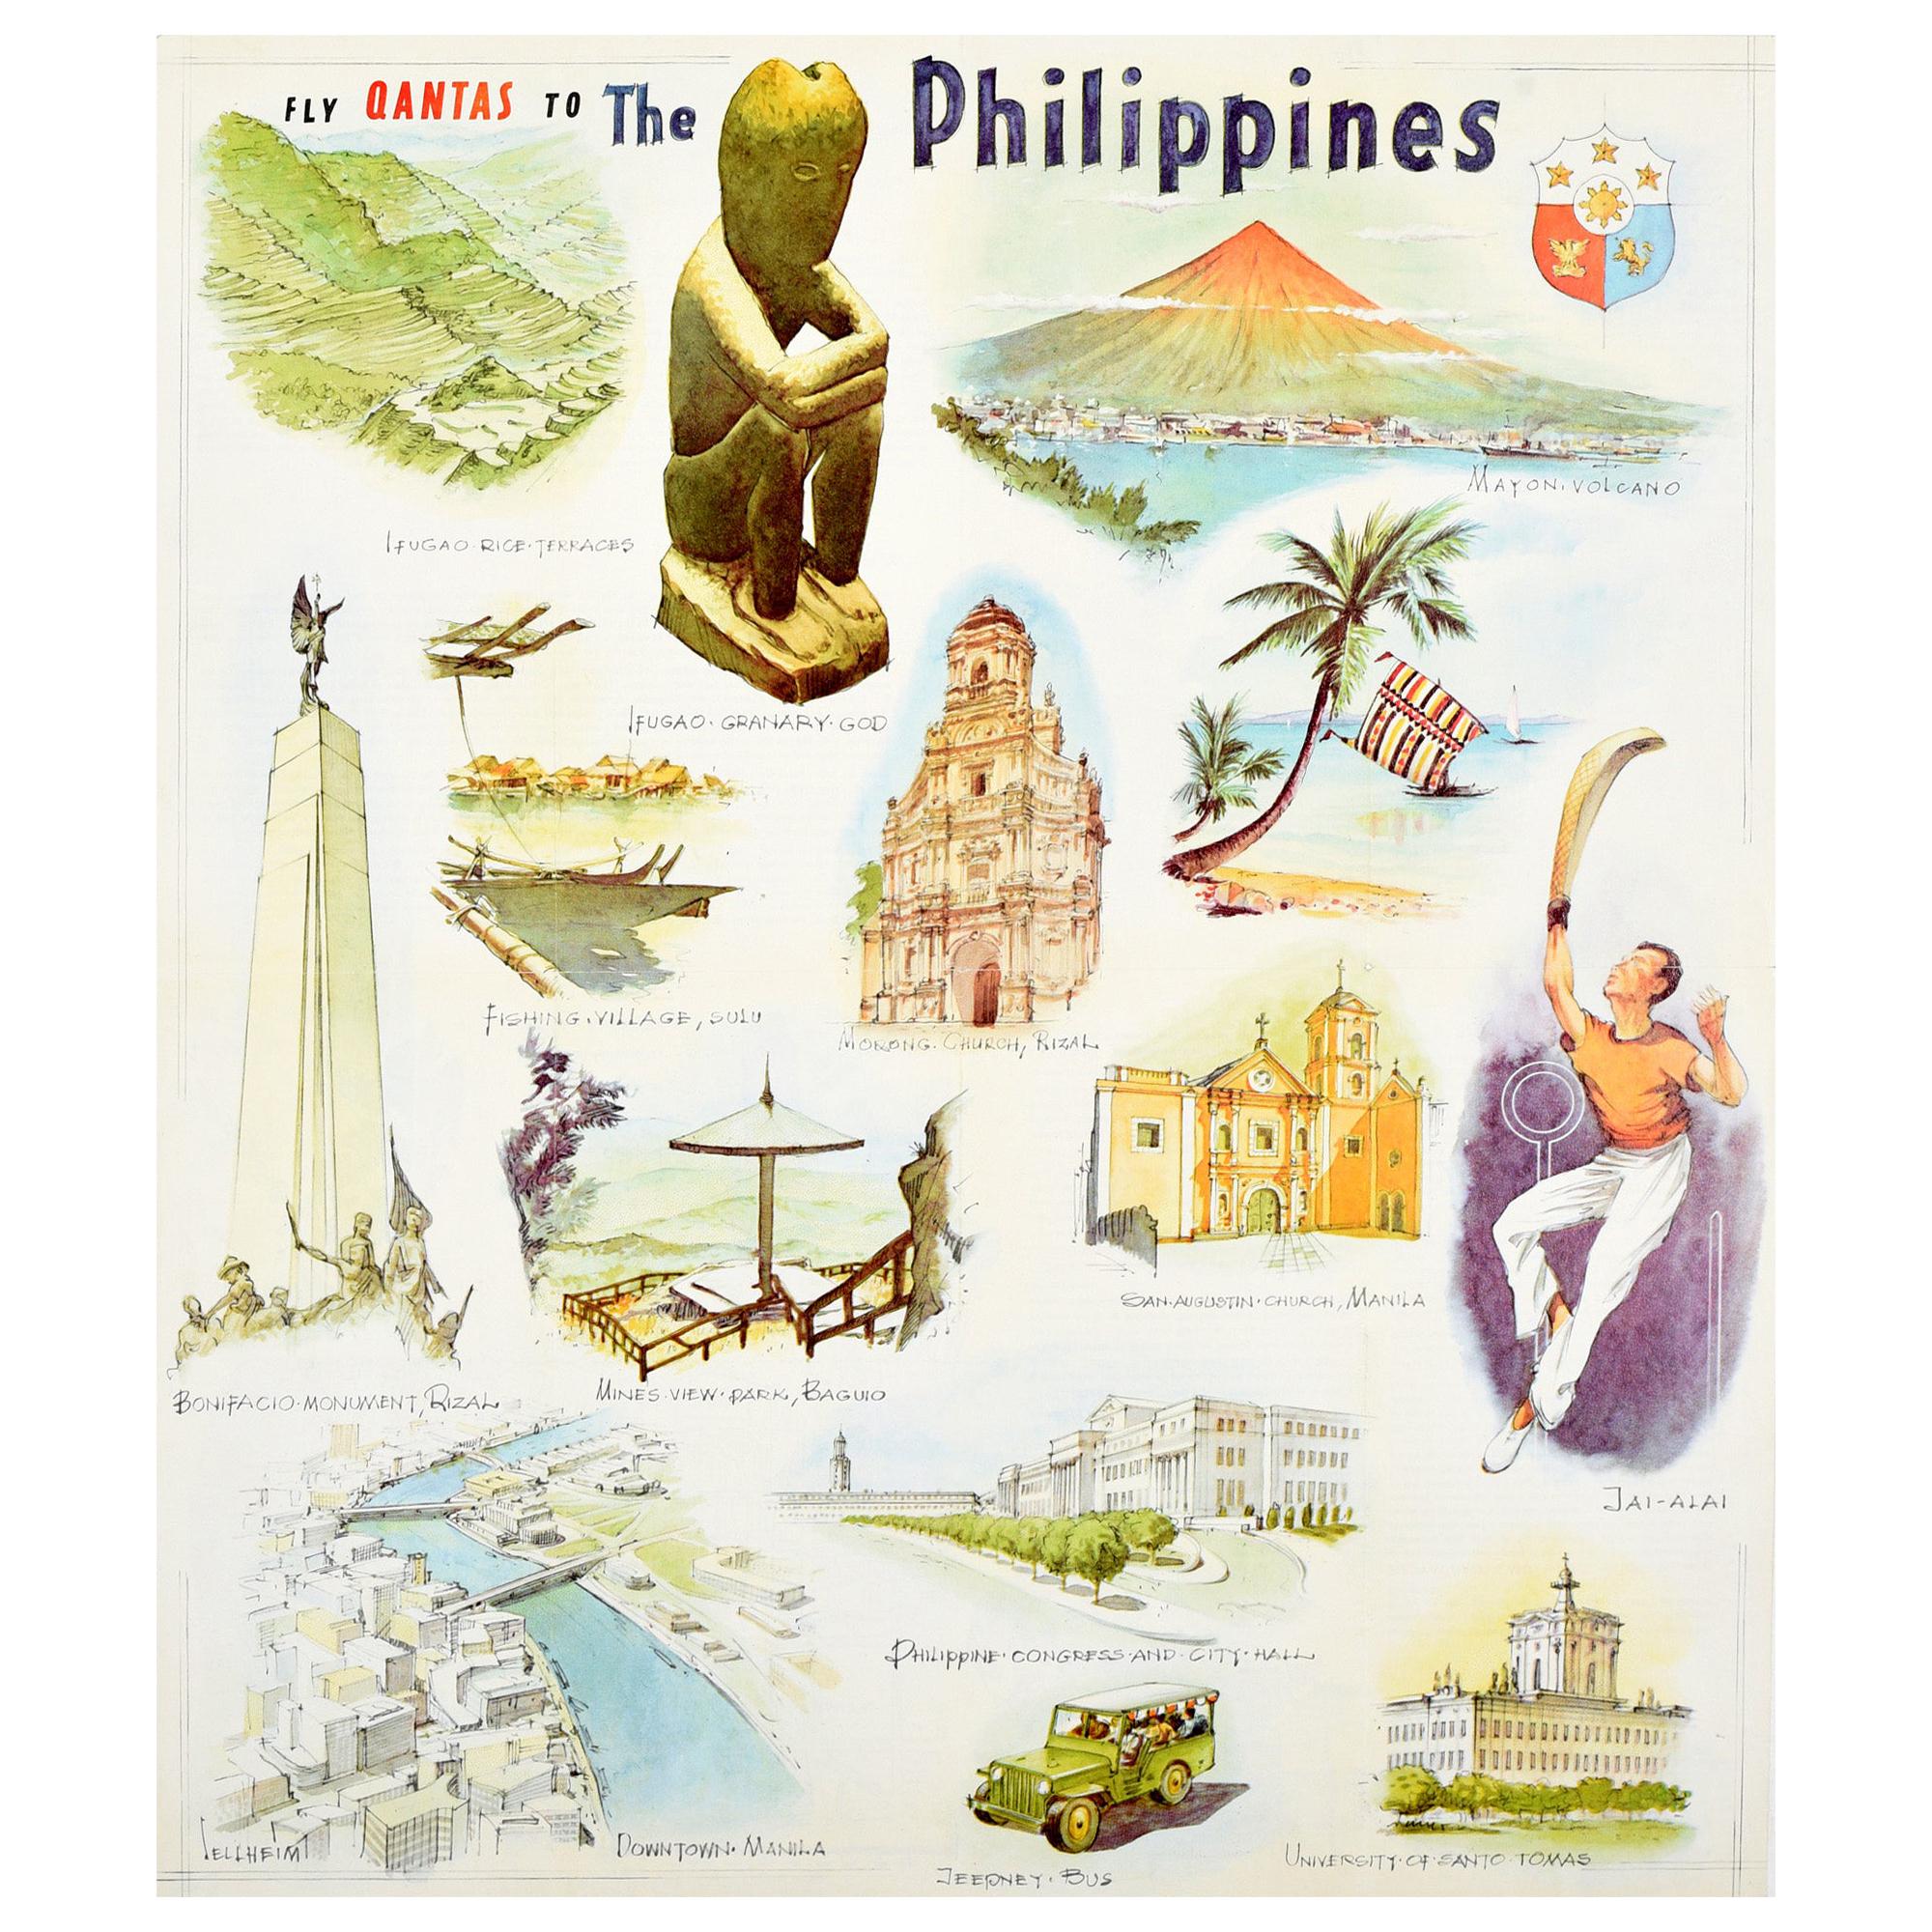 Original Vintage Poster Fly Qantas To The Philippines Travel Art Illustrations